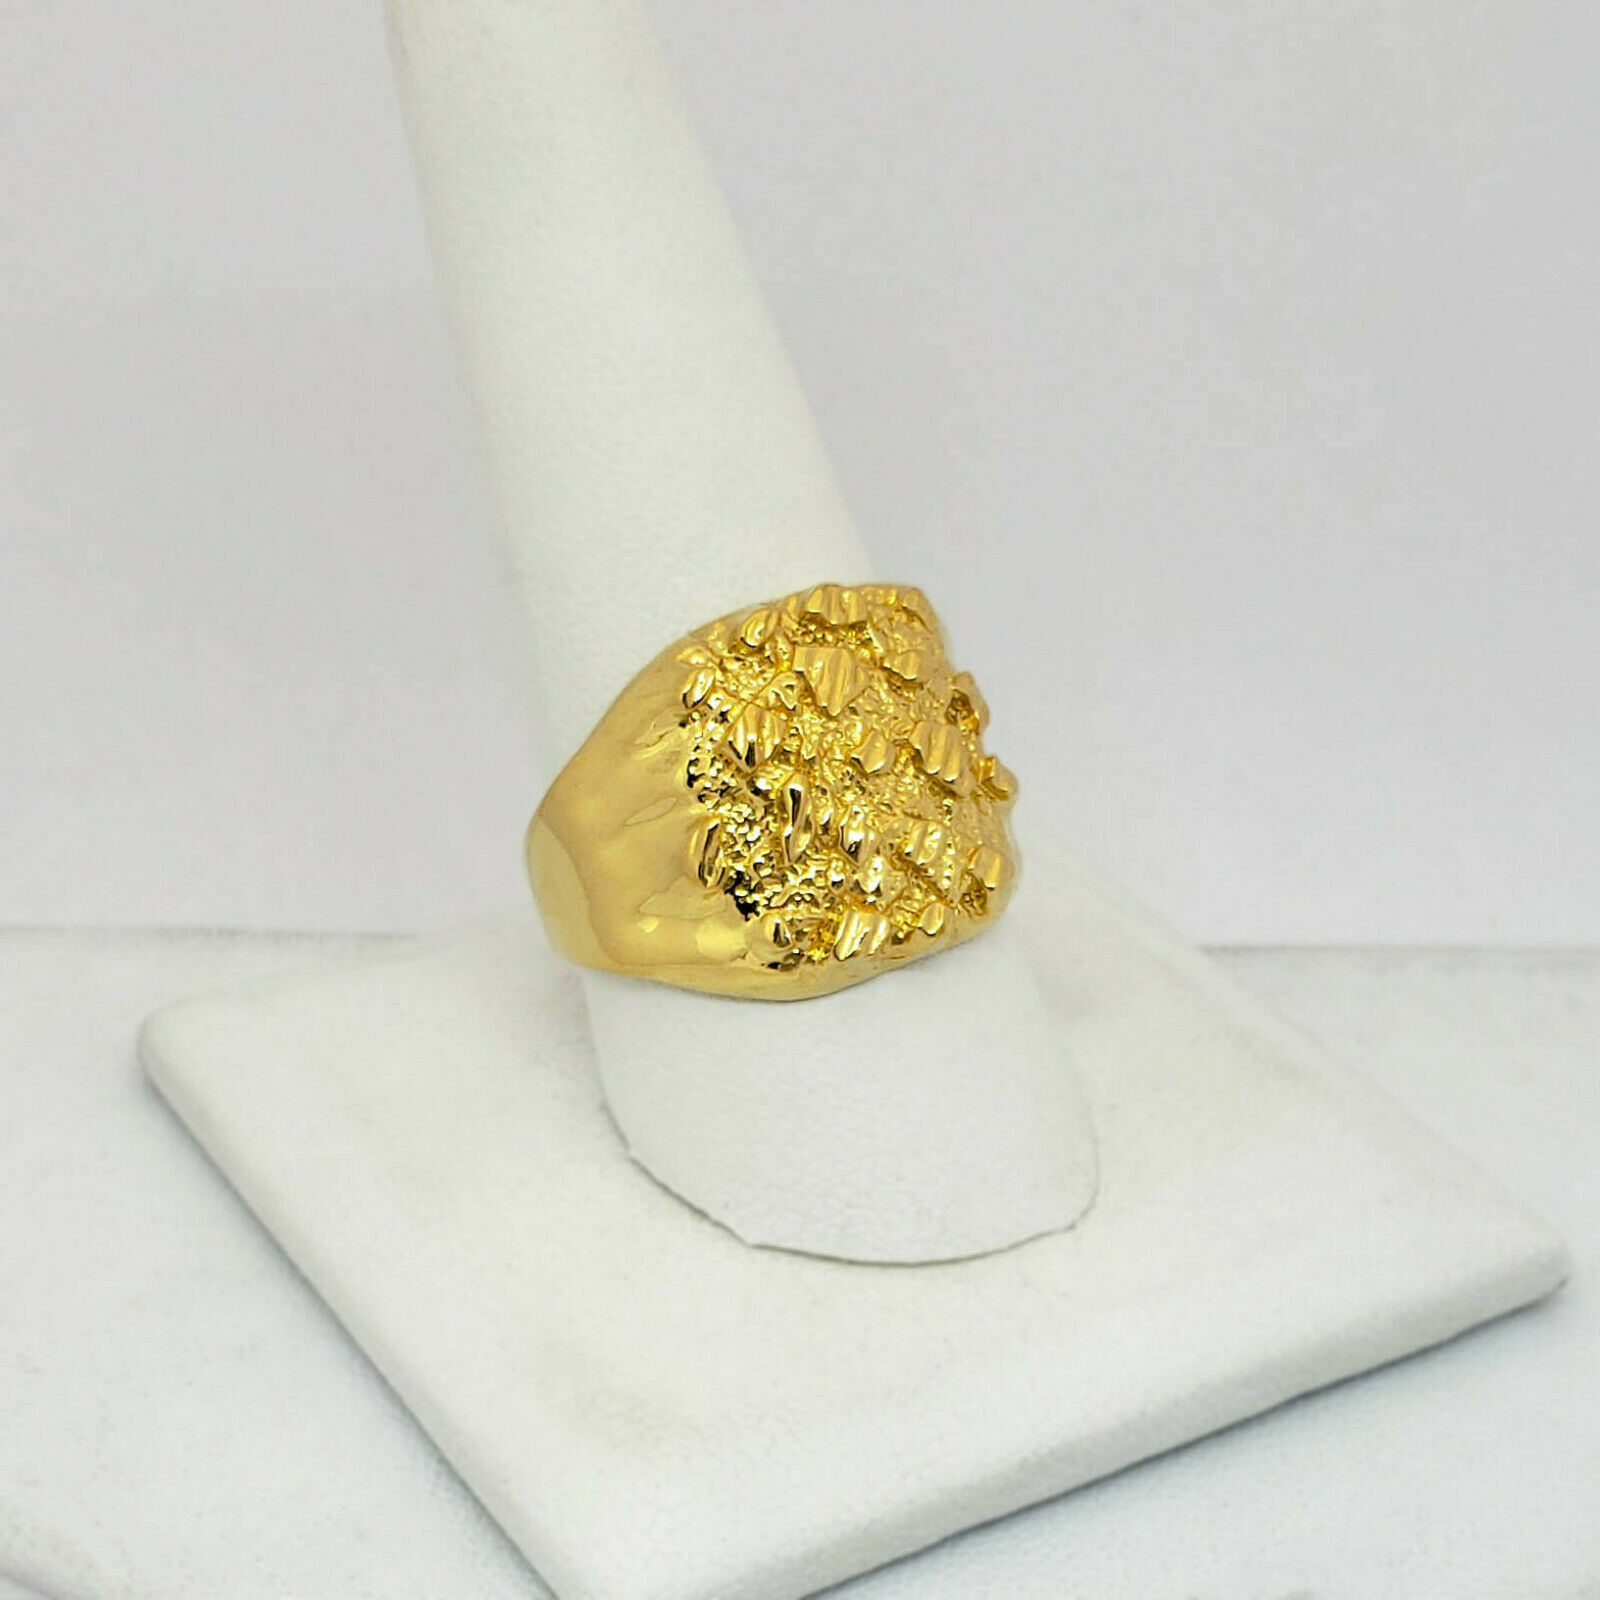 Mens 10k Yellow Gold Nugget Design Ring Size 11 